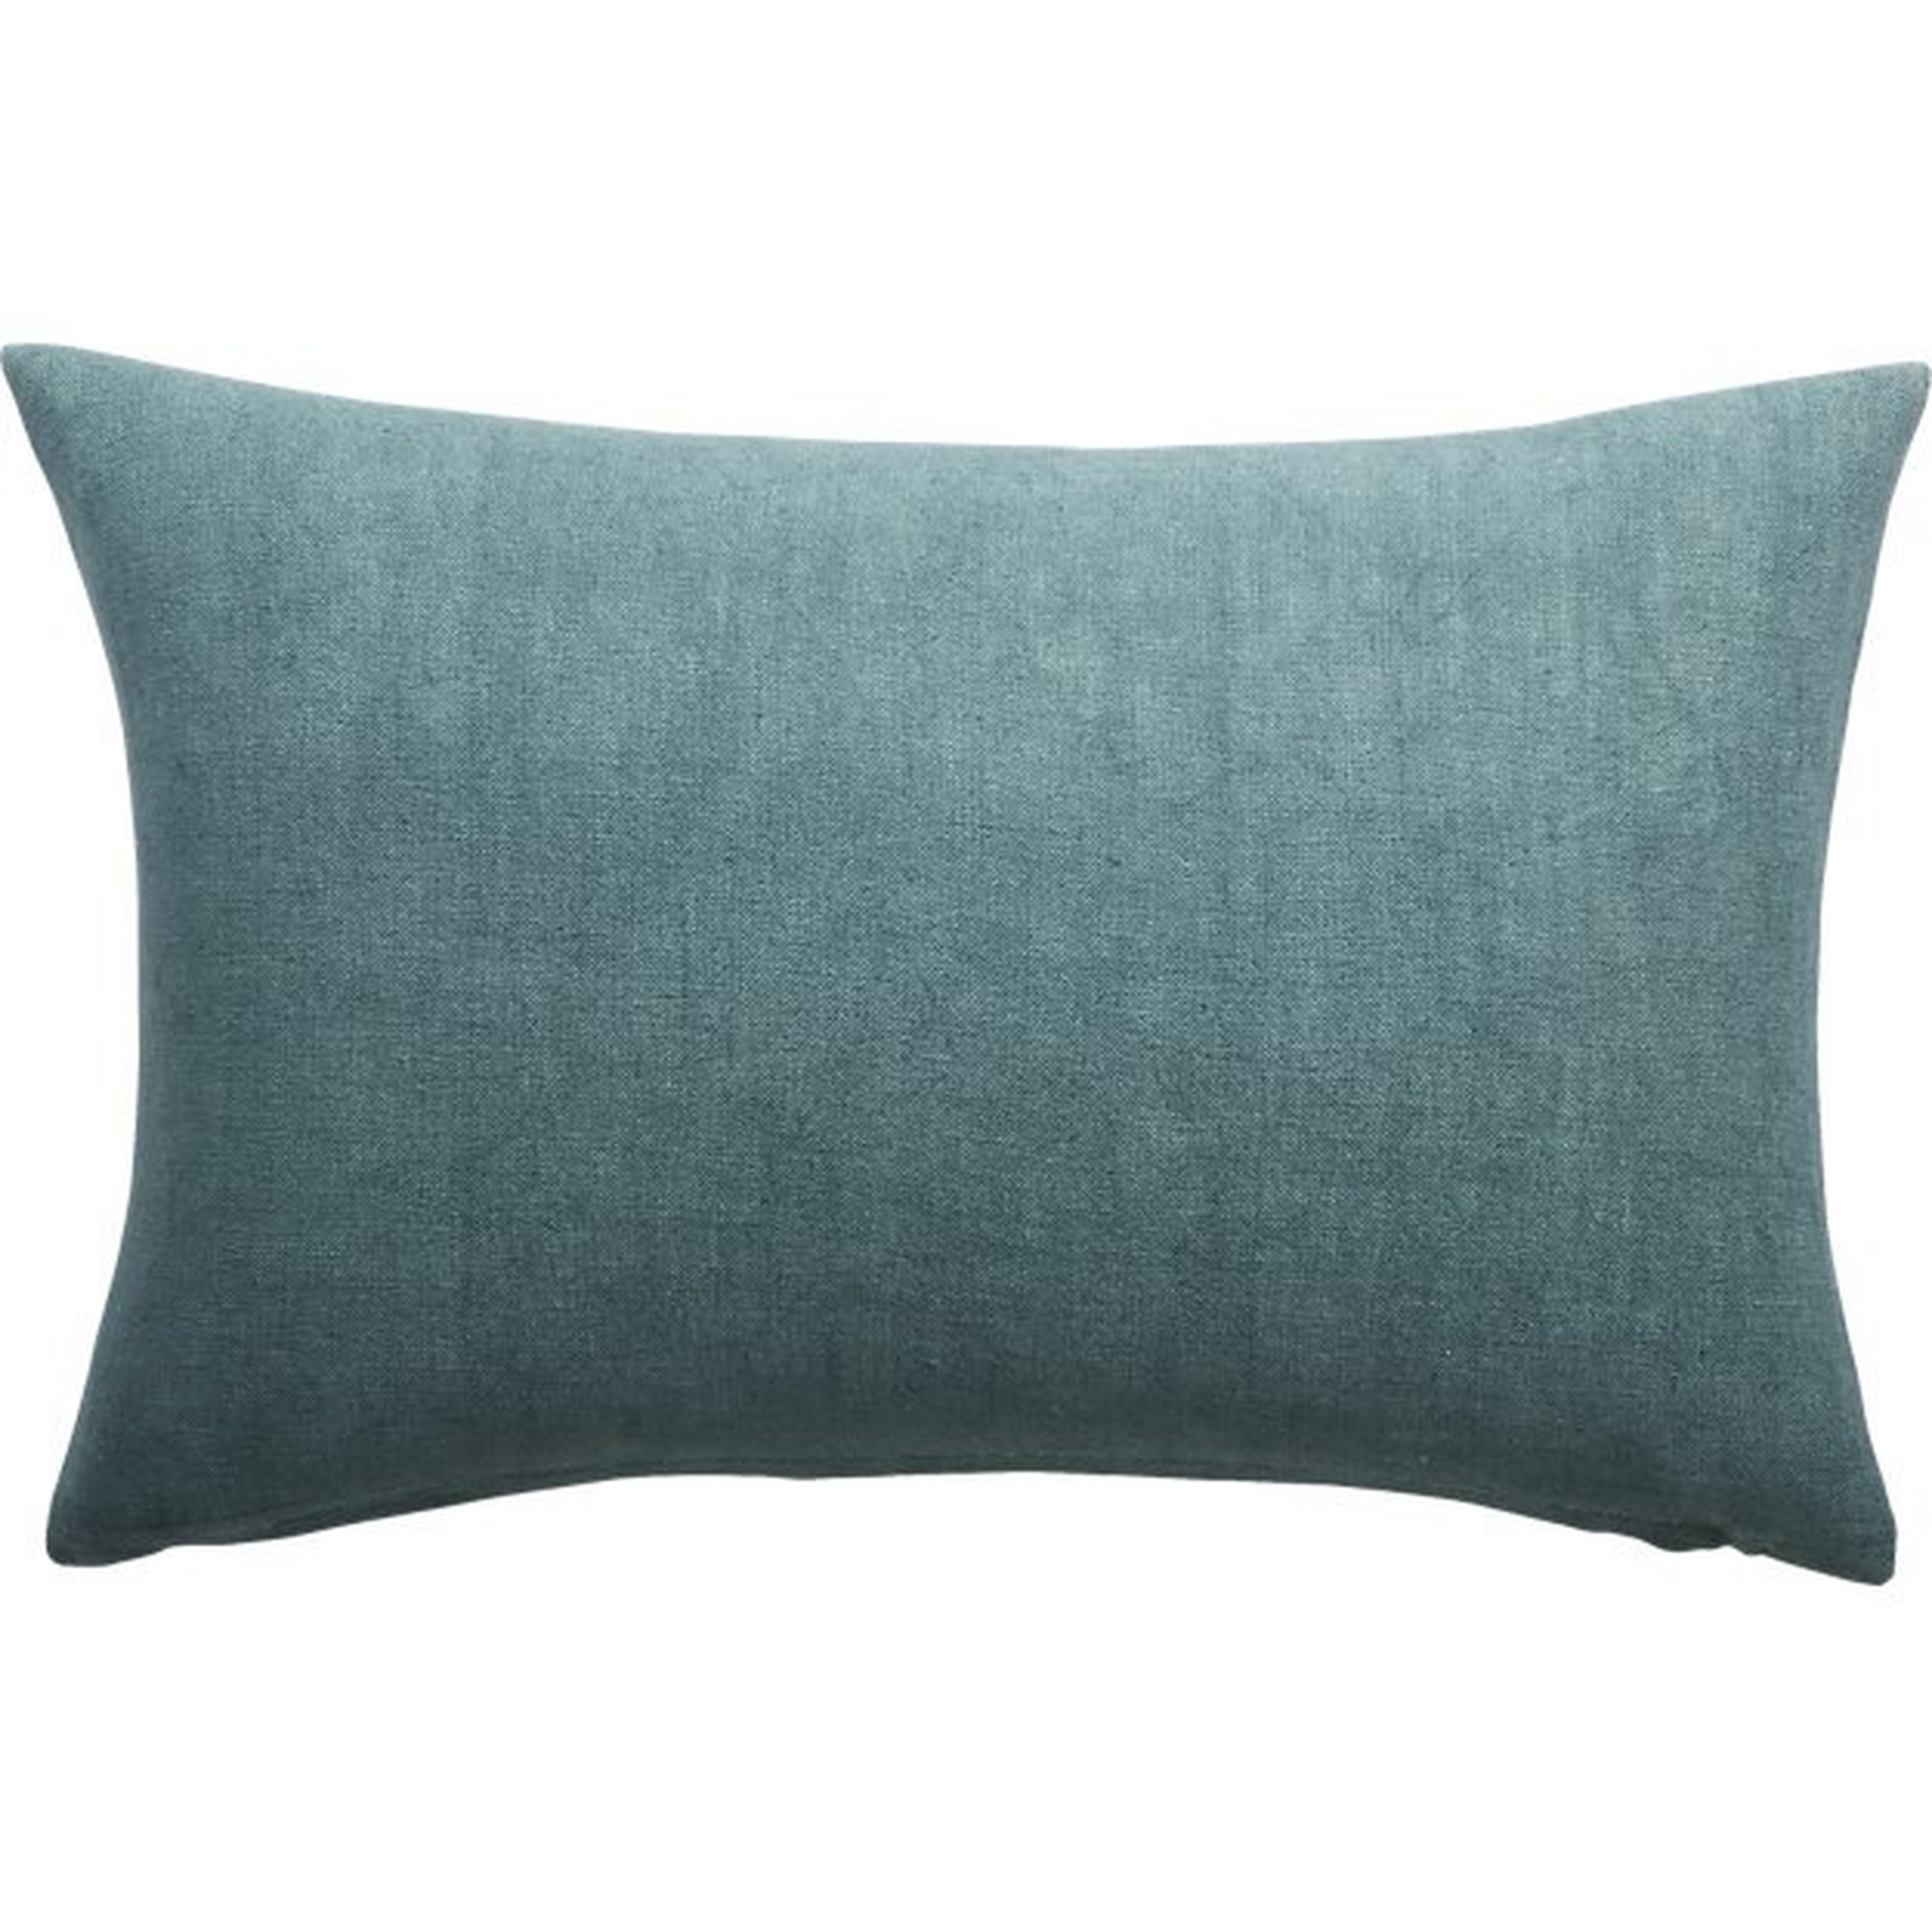 18"x12" linon artic blue pillow with feather-down insert - CB2